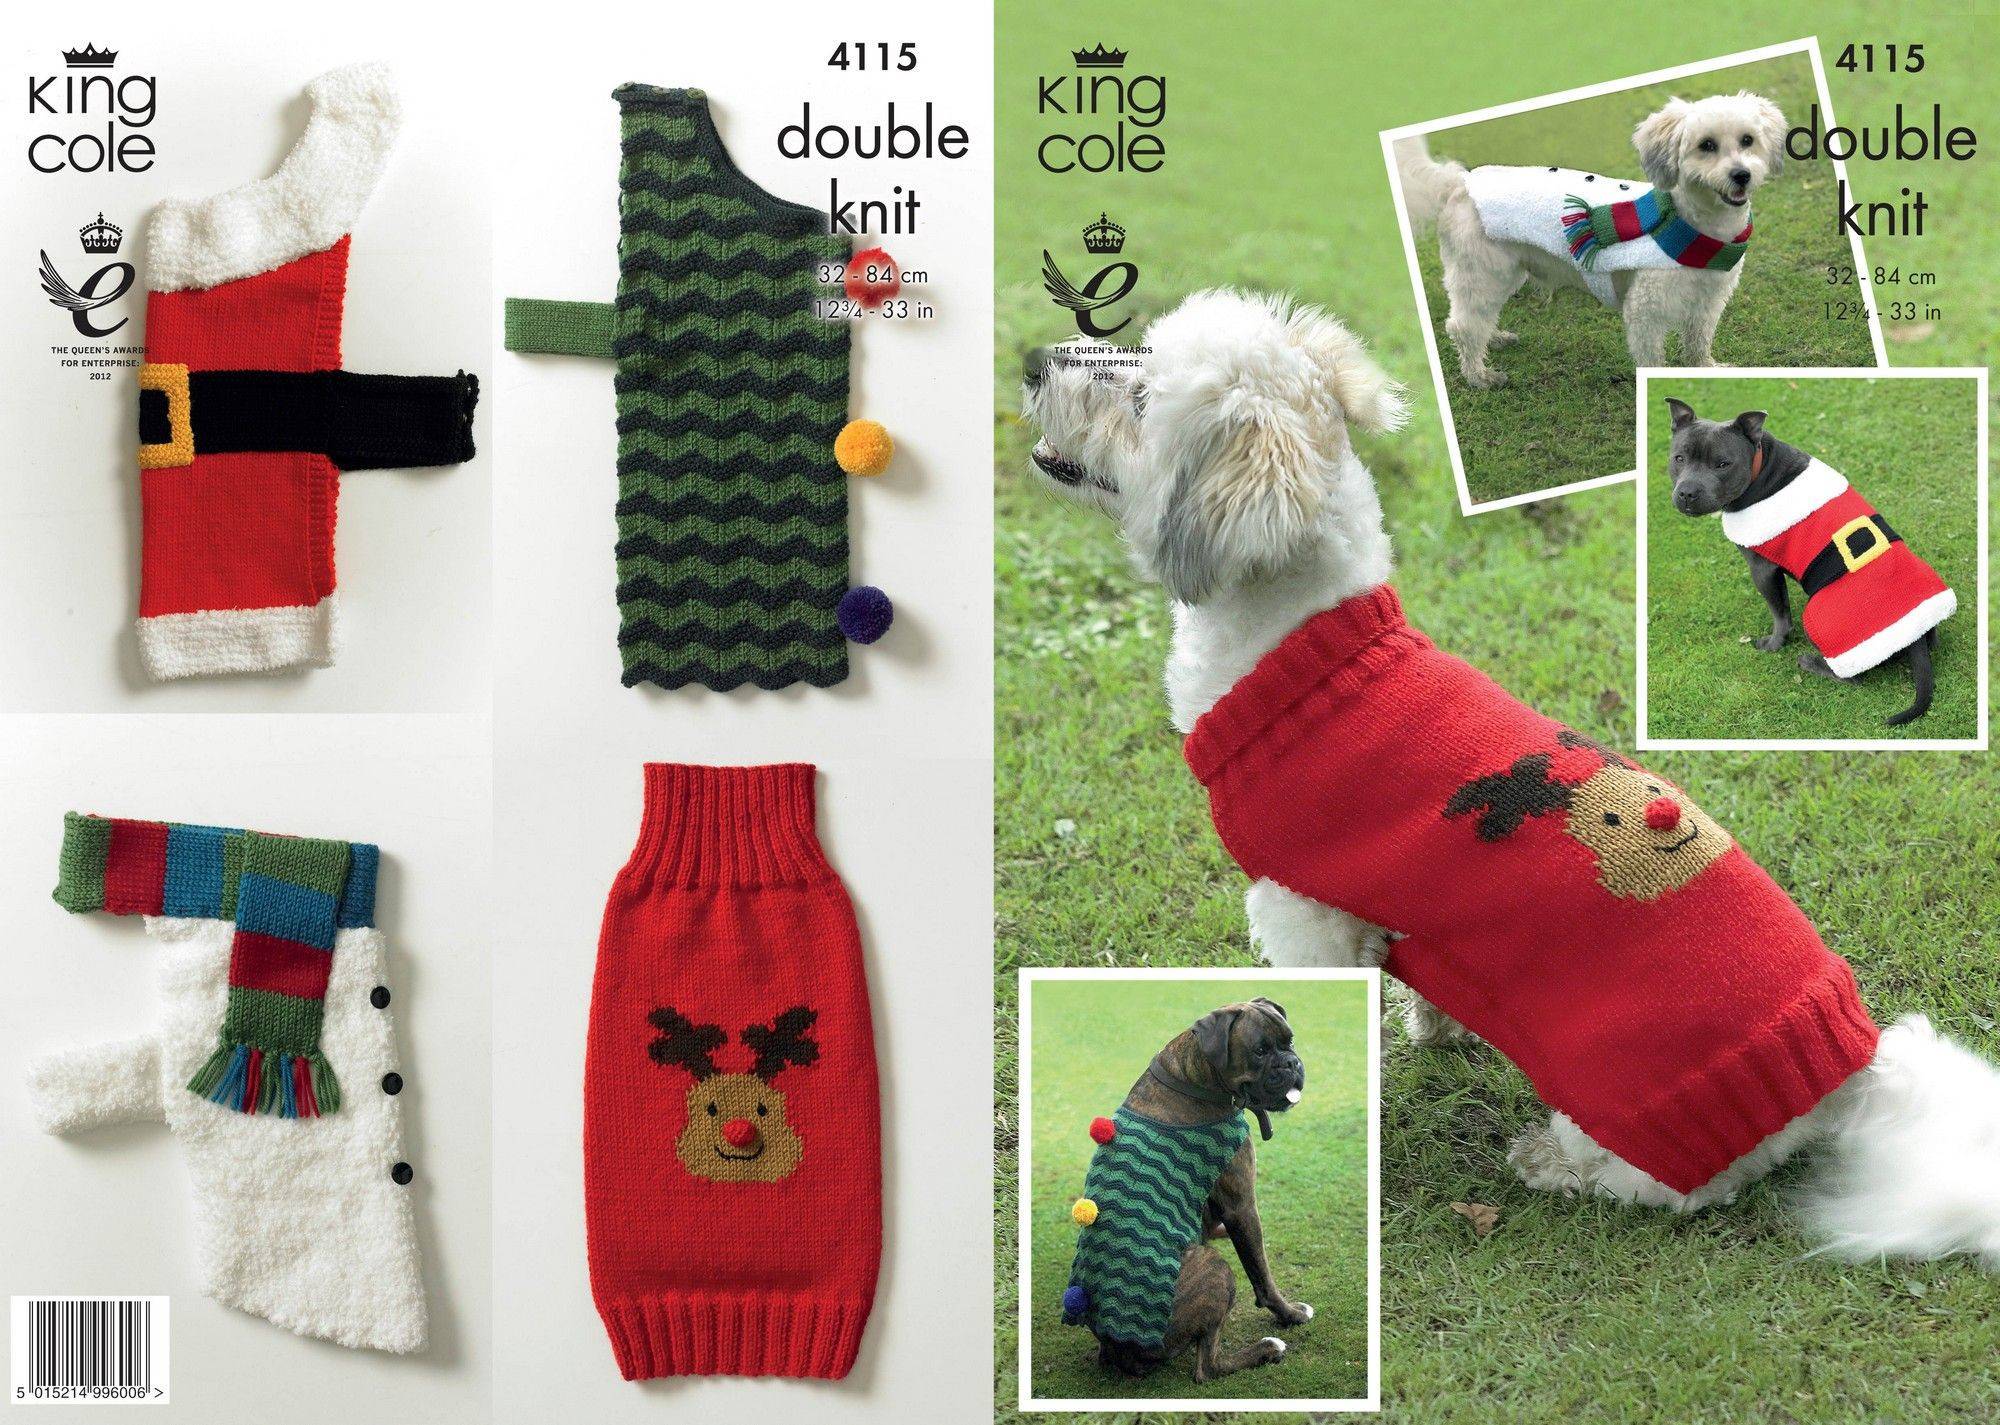 Christmas Dog Coats in King Cole Cuddles DK and King Cole Merino Blend ...